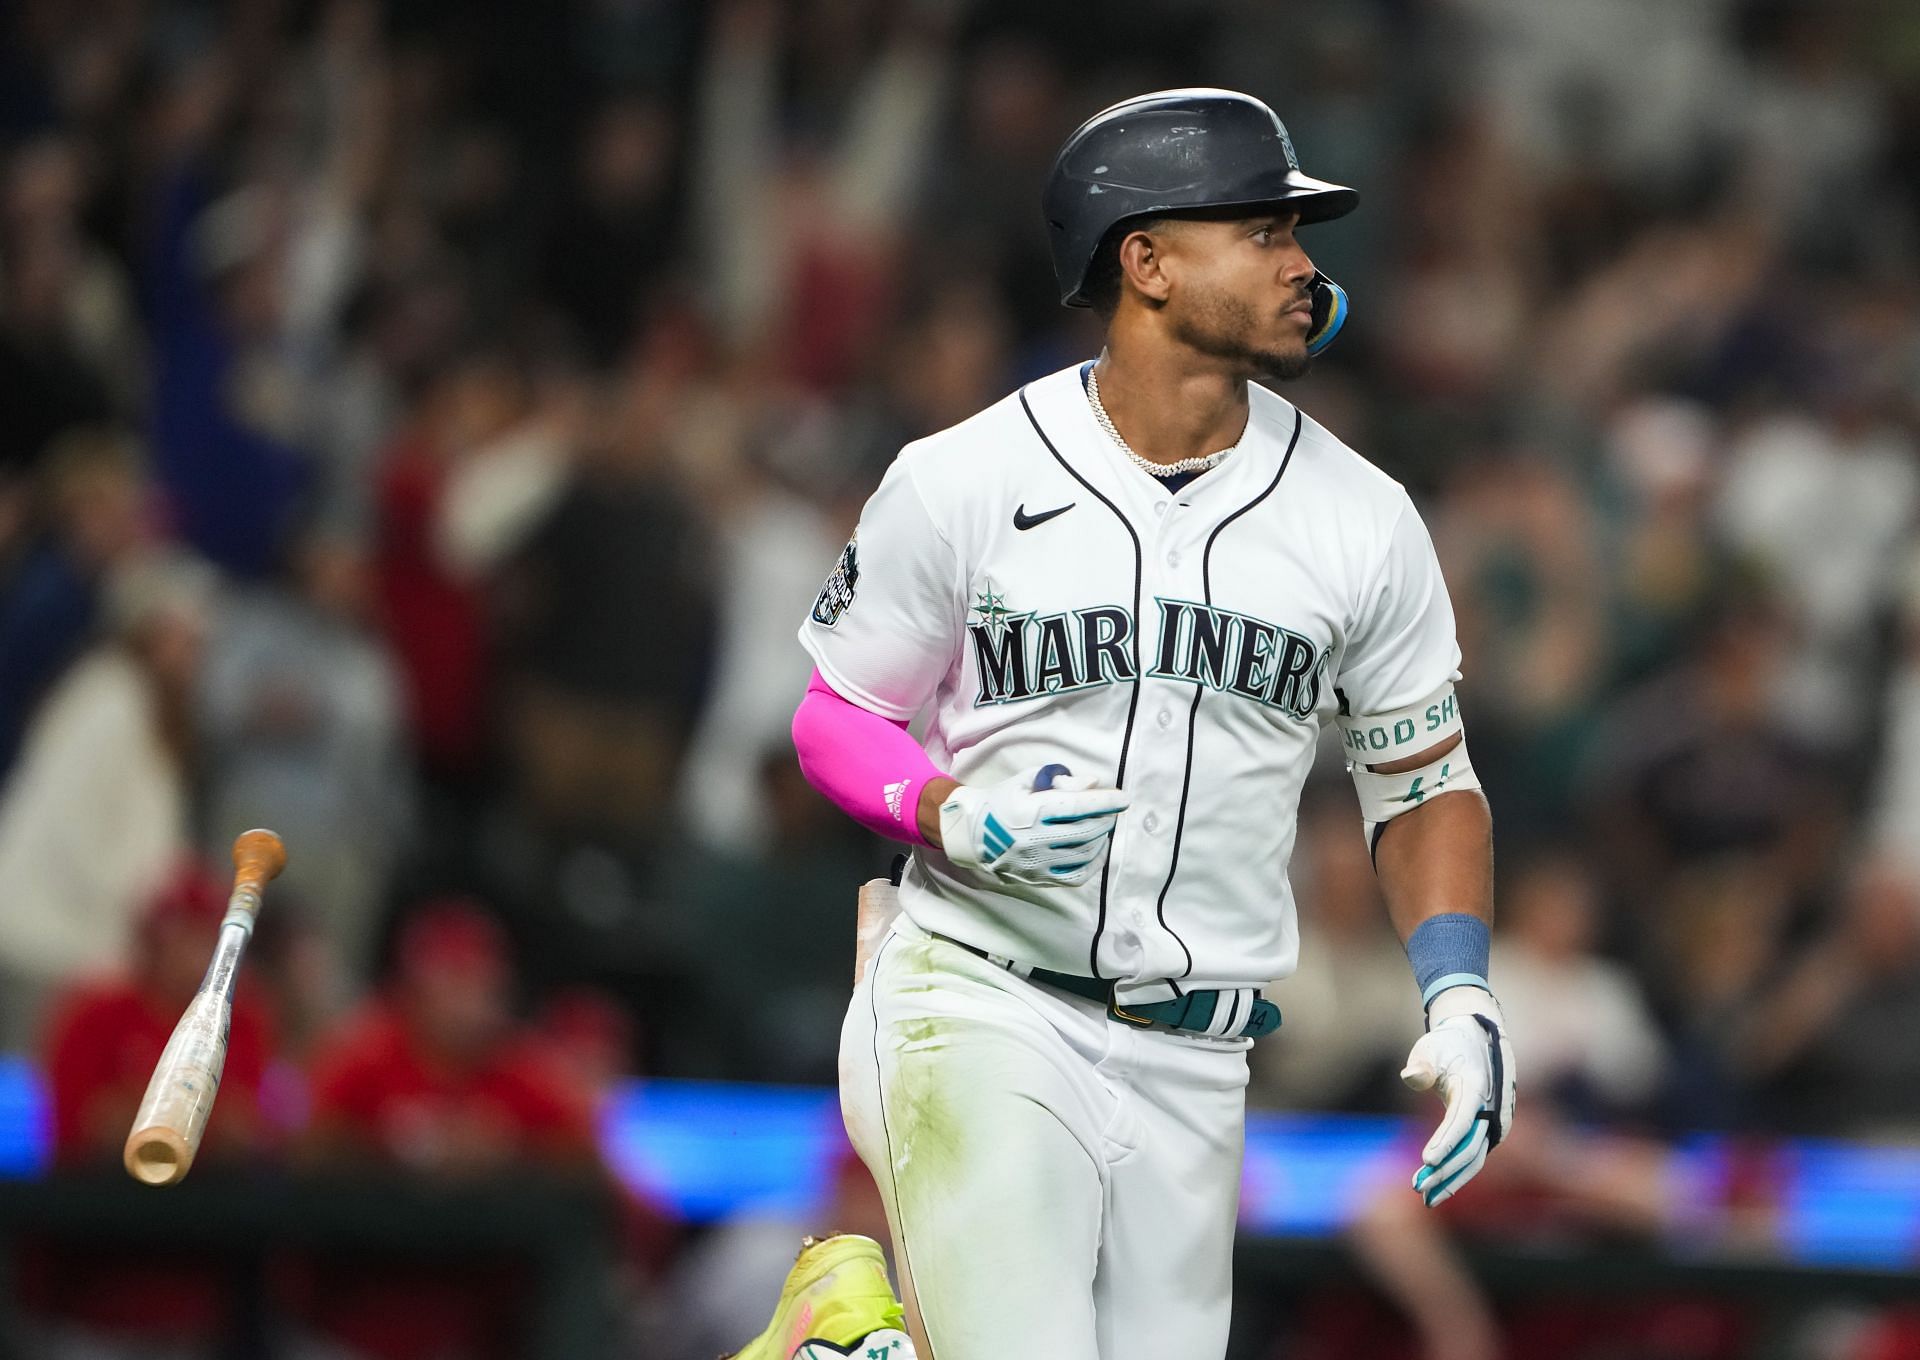 Julio Rodriguez enters 30-30 club as game-tying homer assures Mariners fans  of bright future - We are in good hands for the foreseeable future